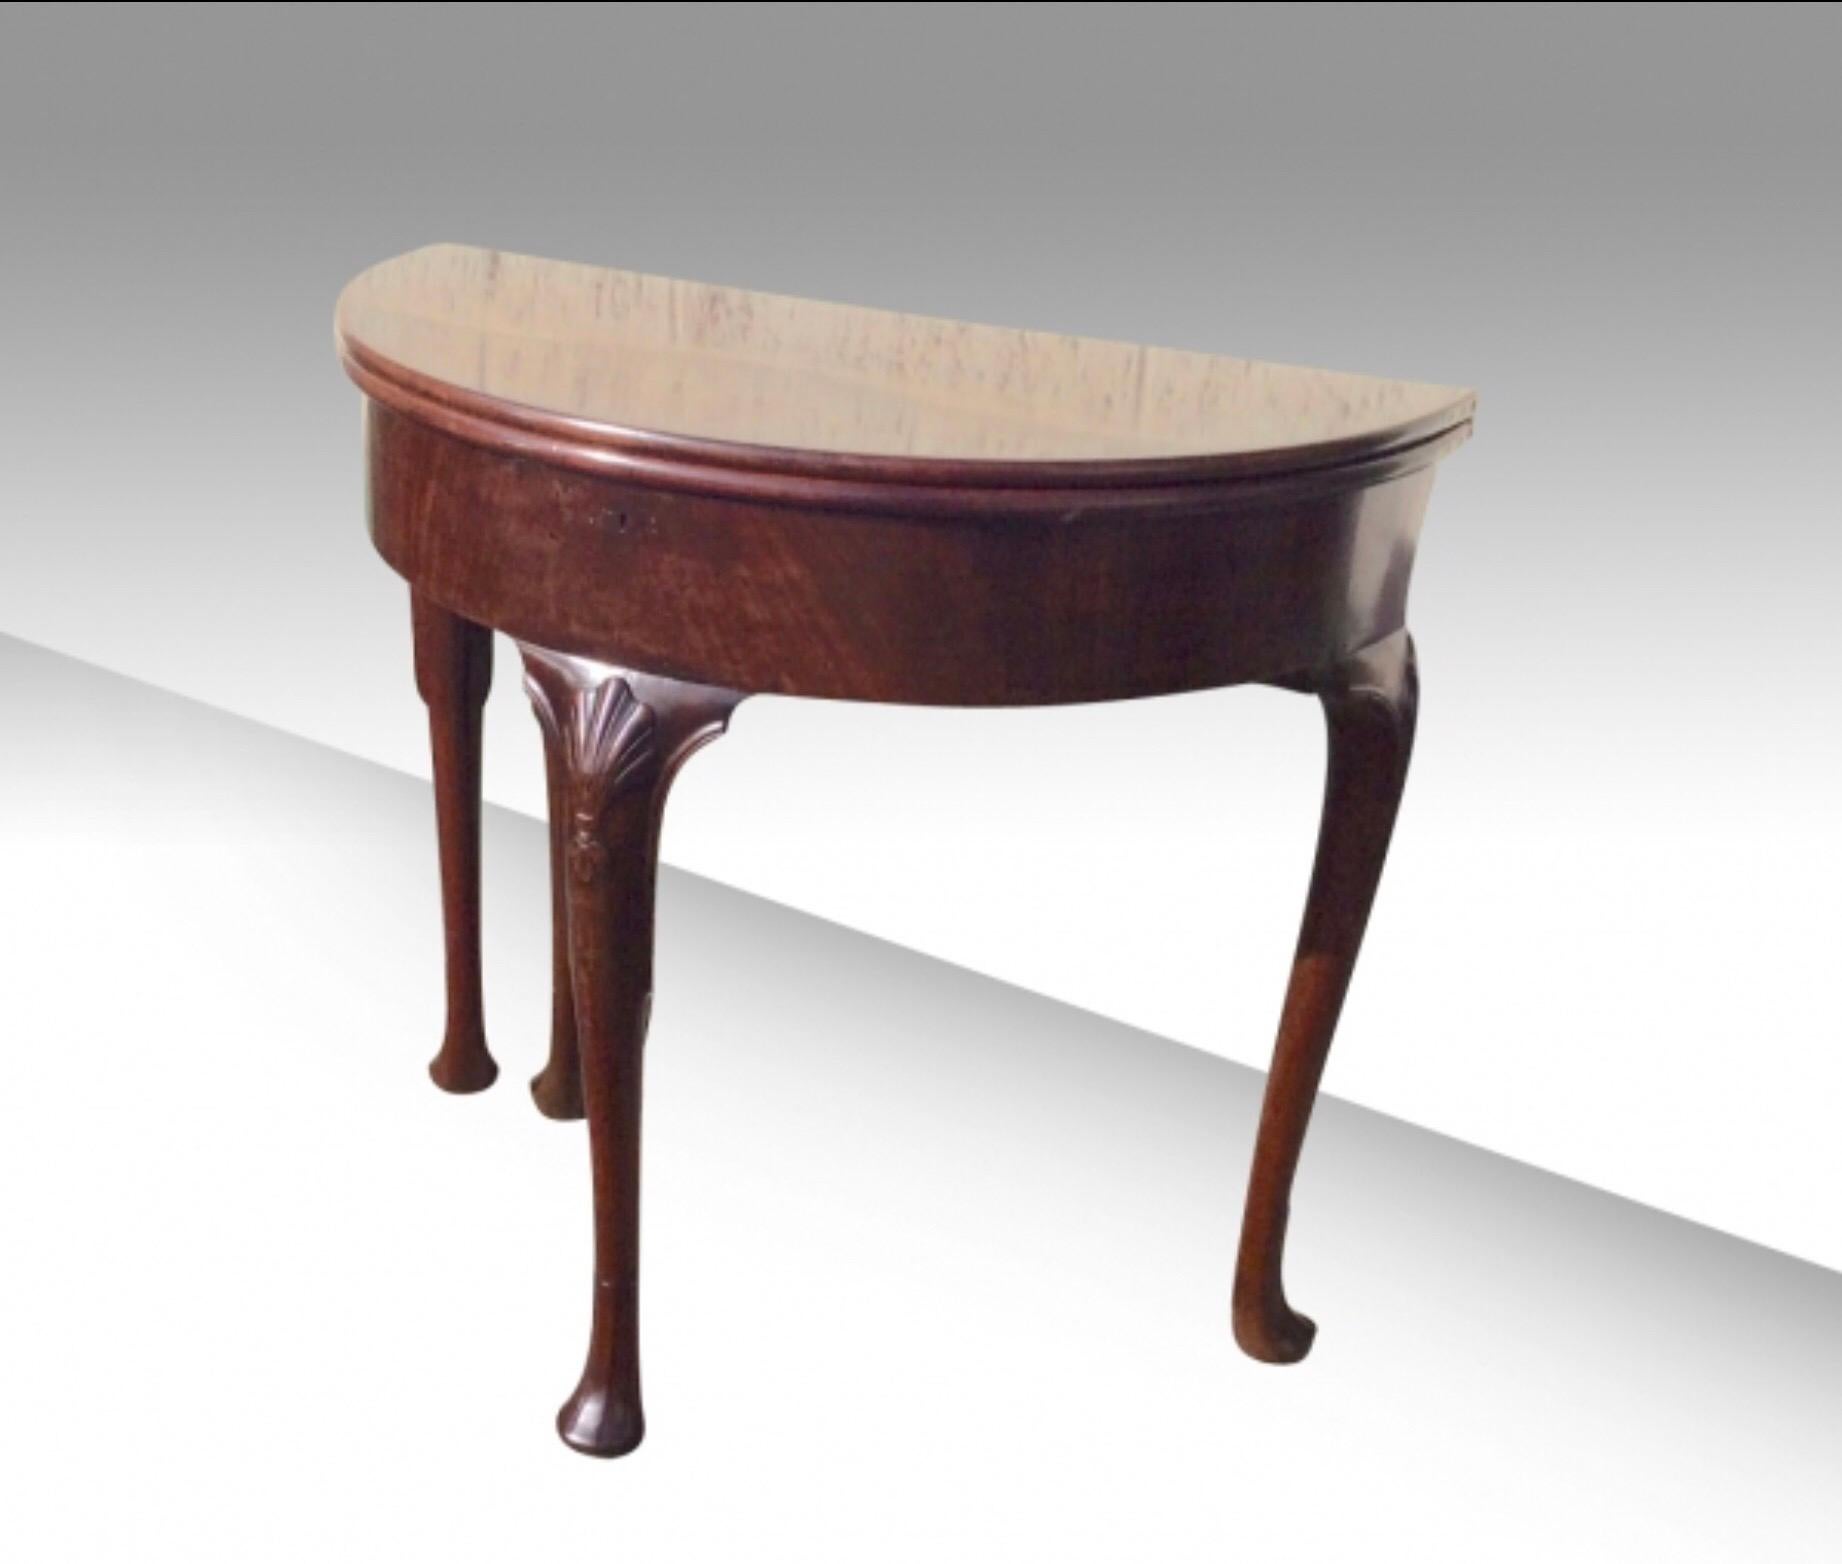 Mid-18th Century Antique Irish George 11 Mahogany Demi lune Turn Over Leaf Games Table and Desk For Sale